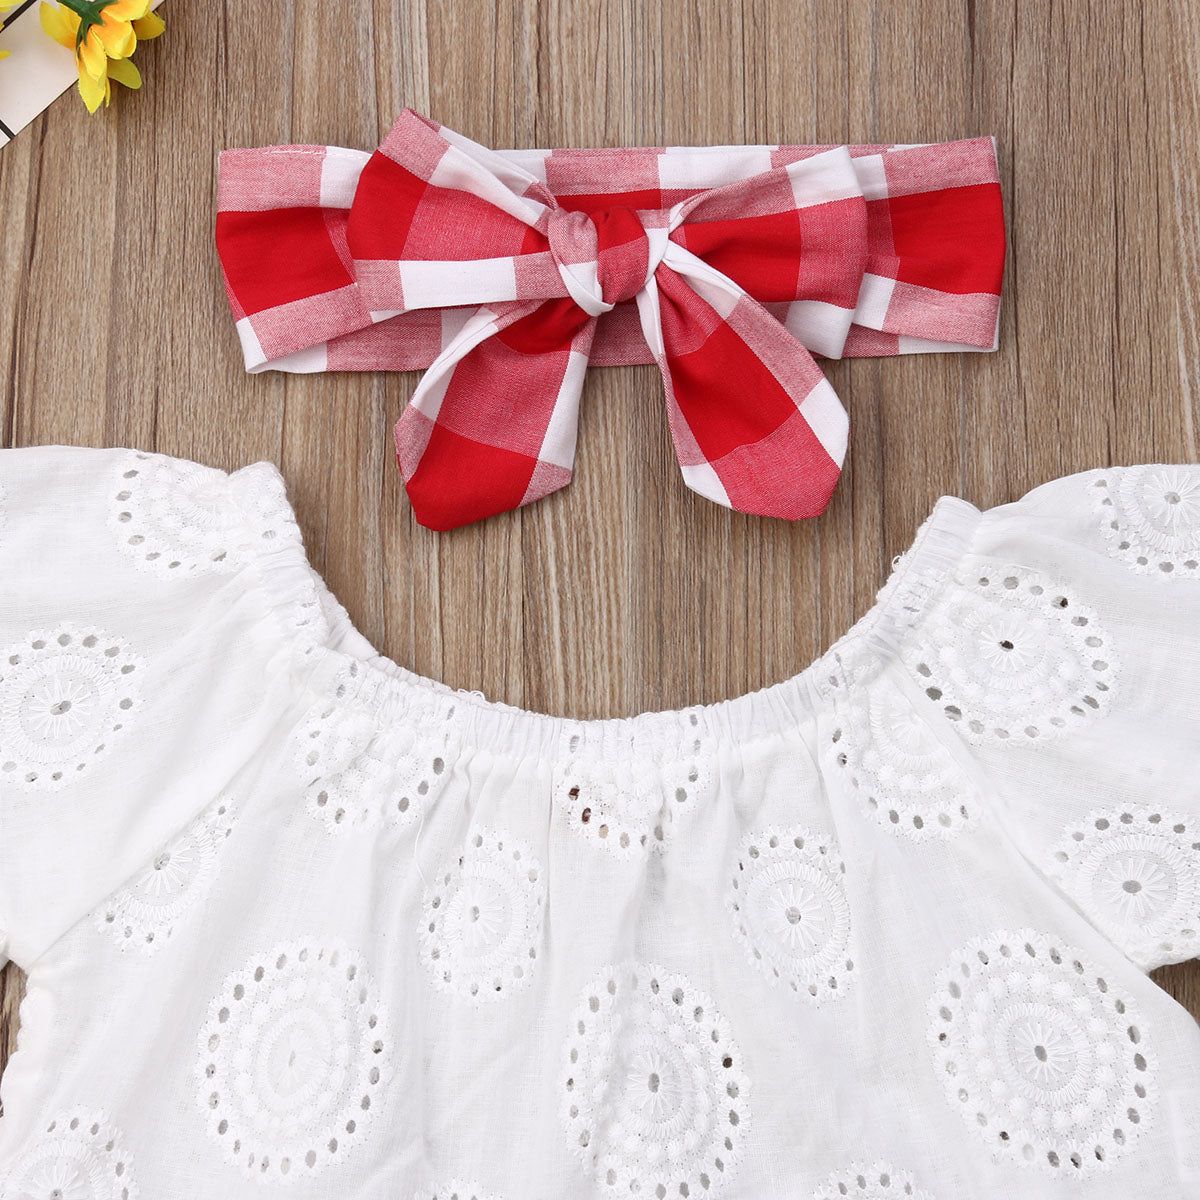 Baby Girl Clothes Summer | Off Shoulder Lace Tops+ Red Plaid Short Dress Headband Outfit